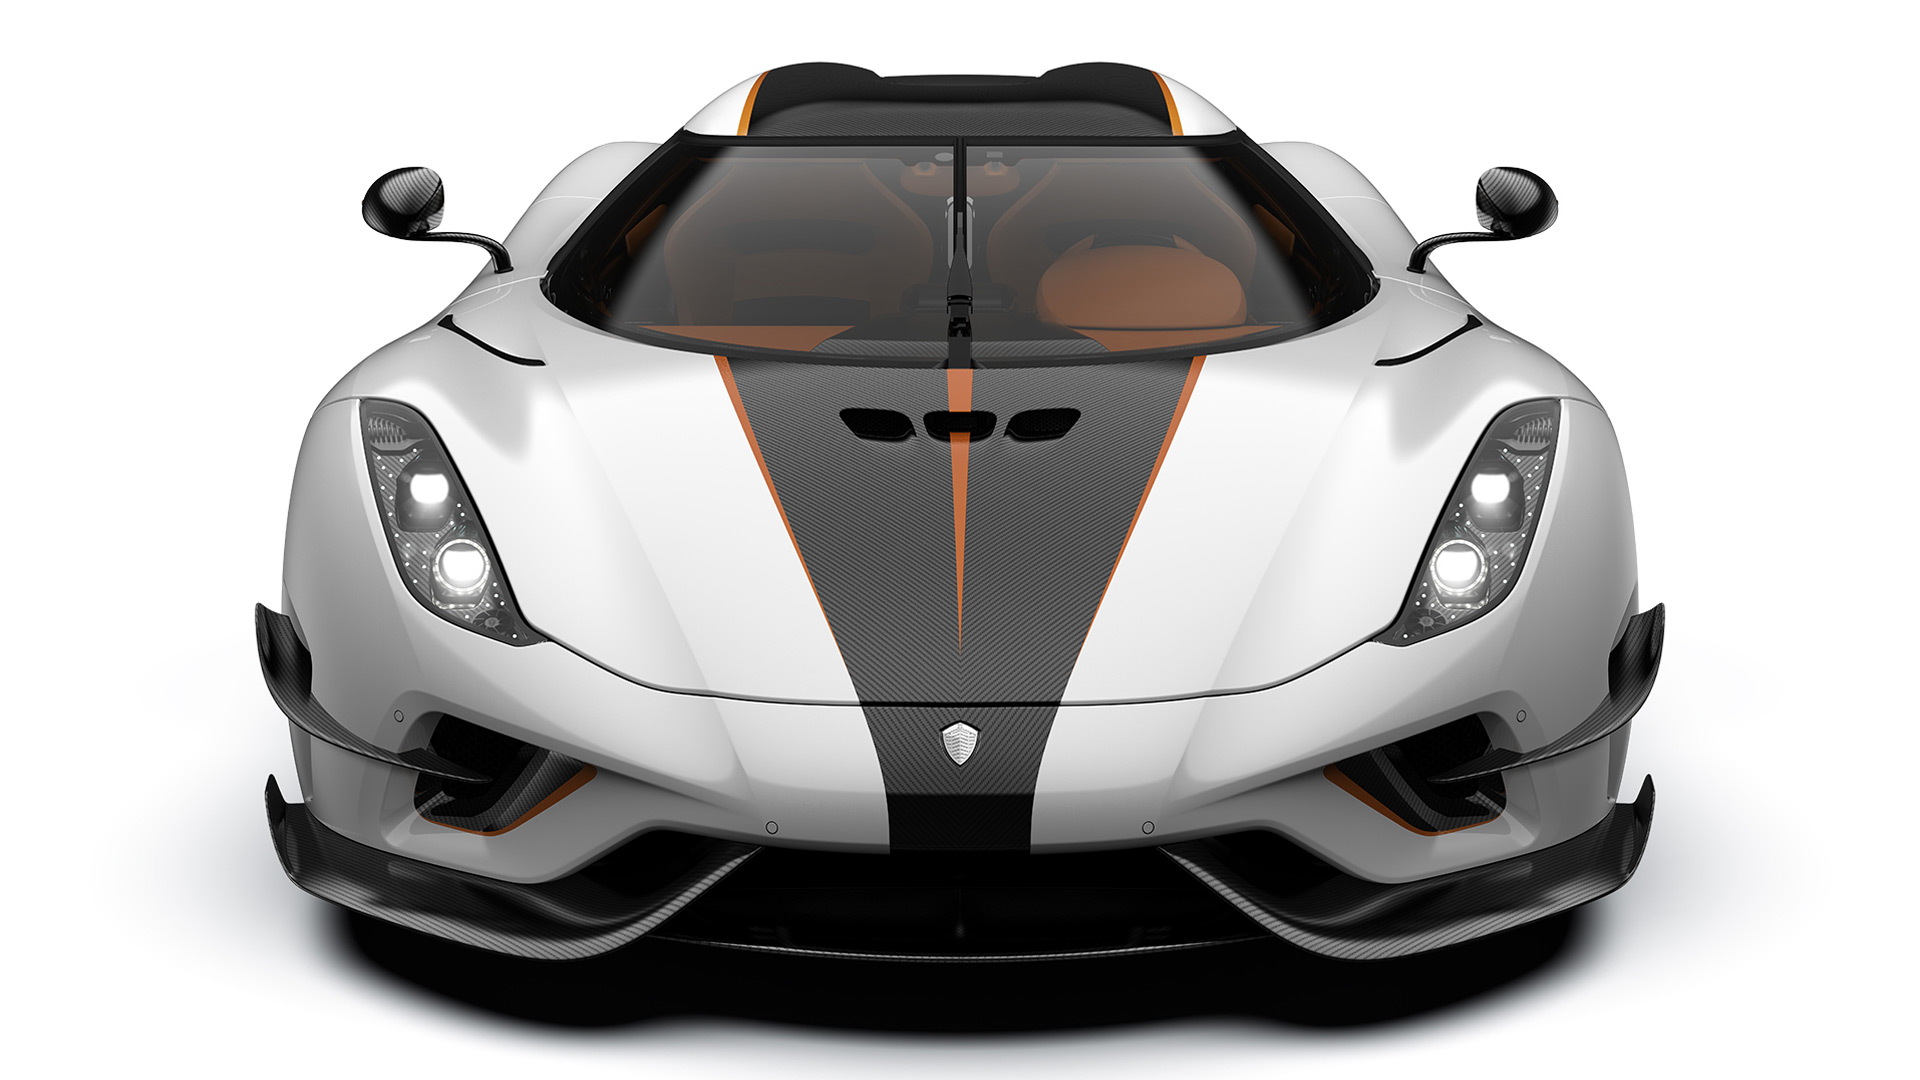 Koenigsegg Regera with Ghost high-downforce package